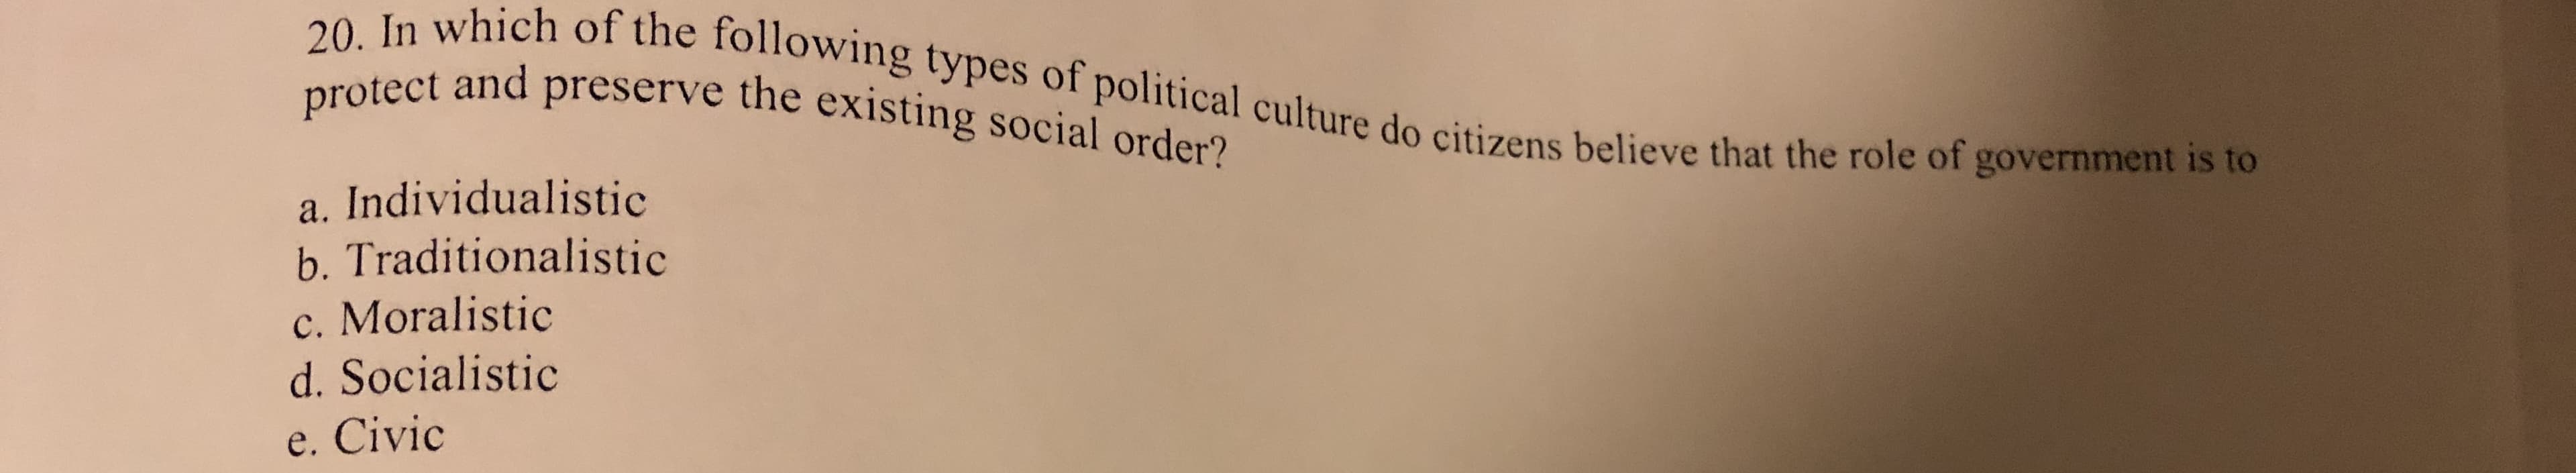 20. In which of the following types of political culture do citizens believe that the role of government is to
protect and preserve the existing social order?
a. Individualistic
b. Traditionalistic
c. Moralistic
d. Socialistic
e. Civic
